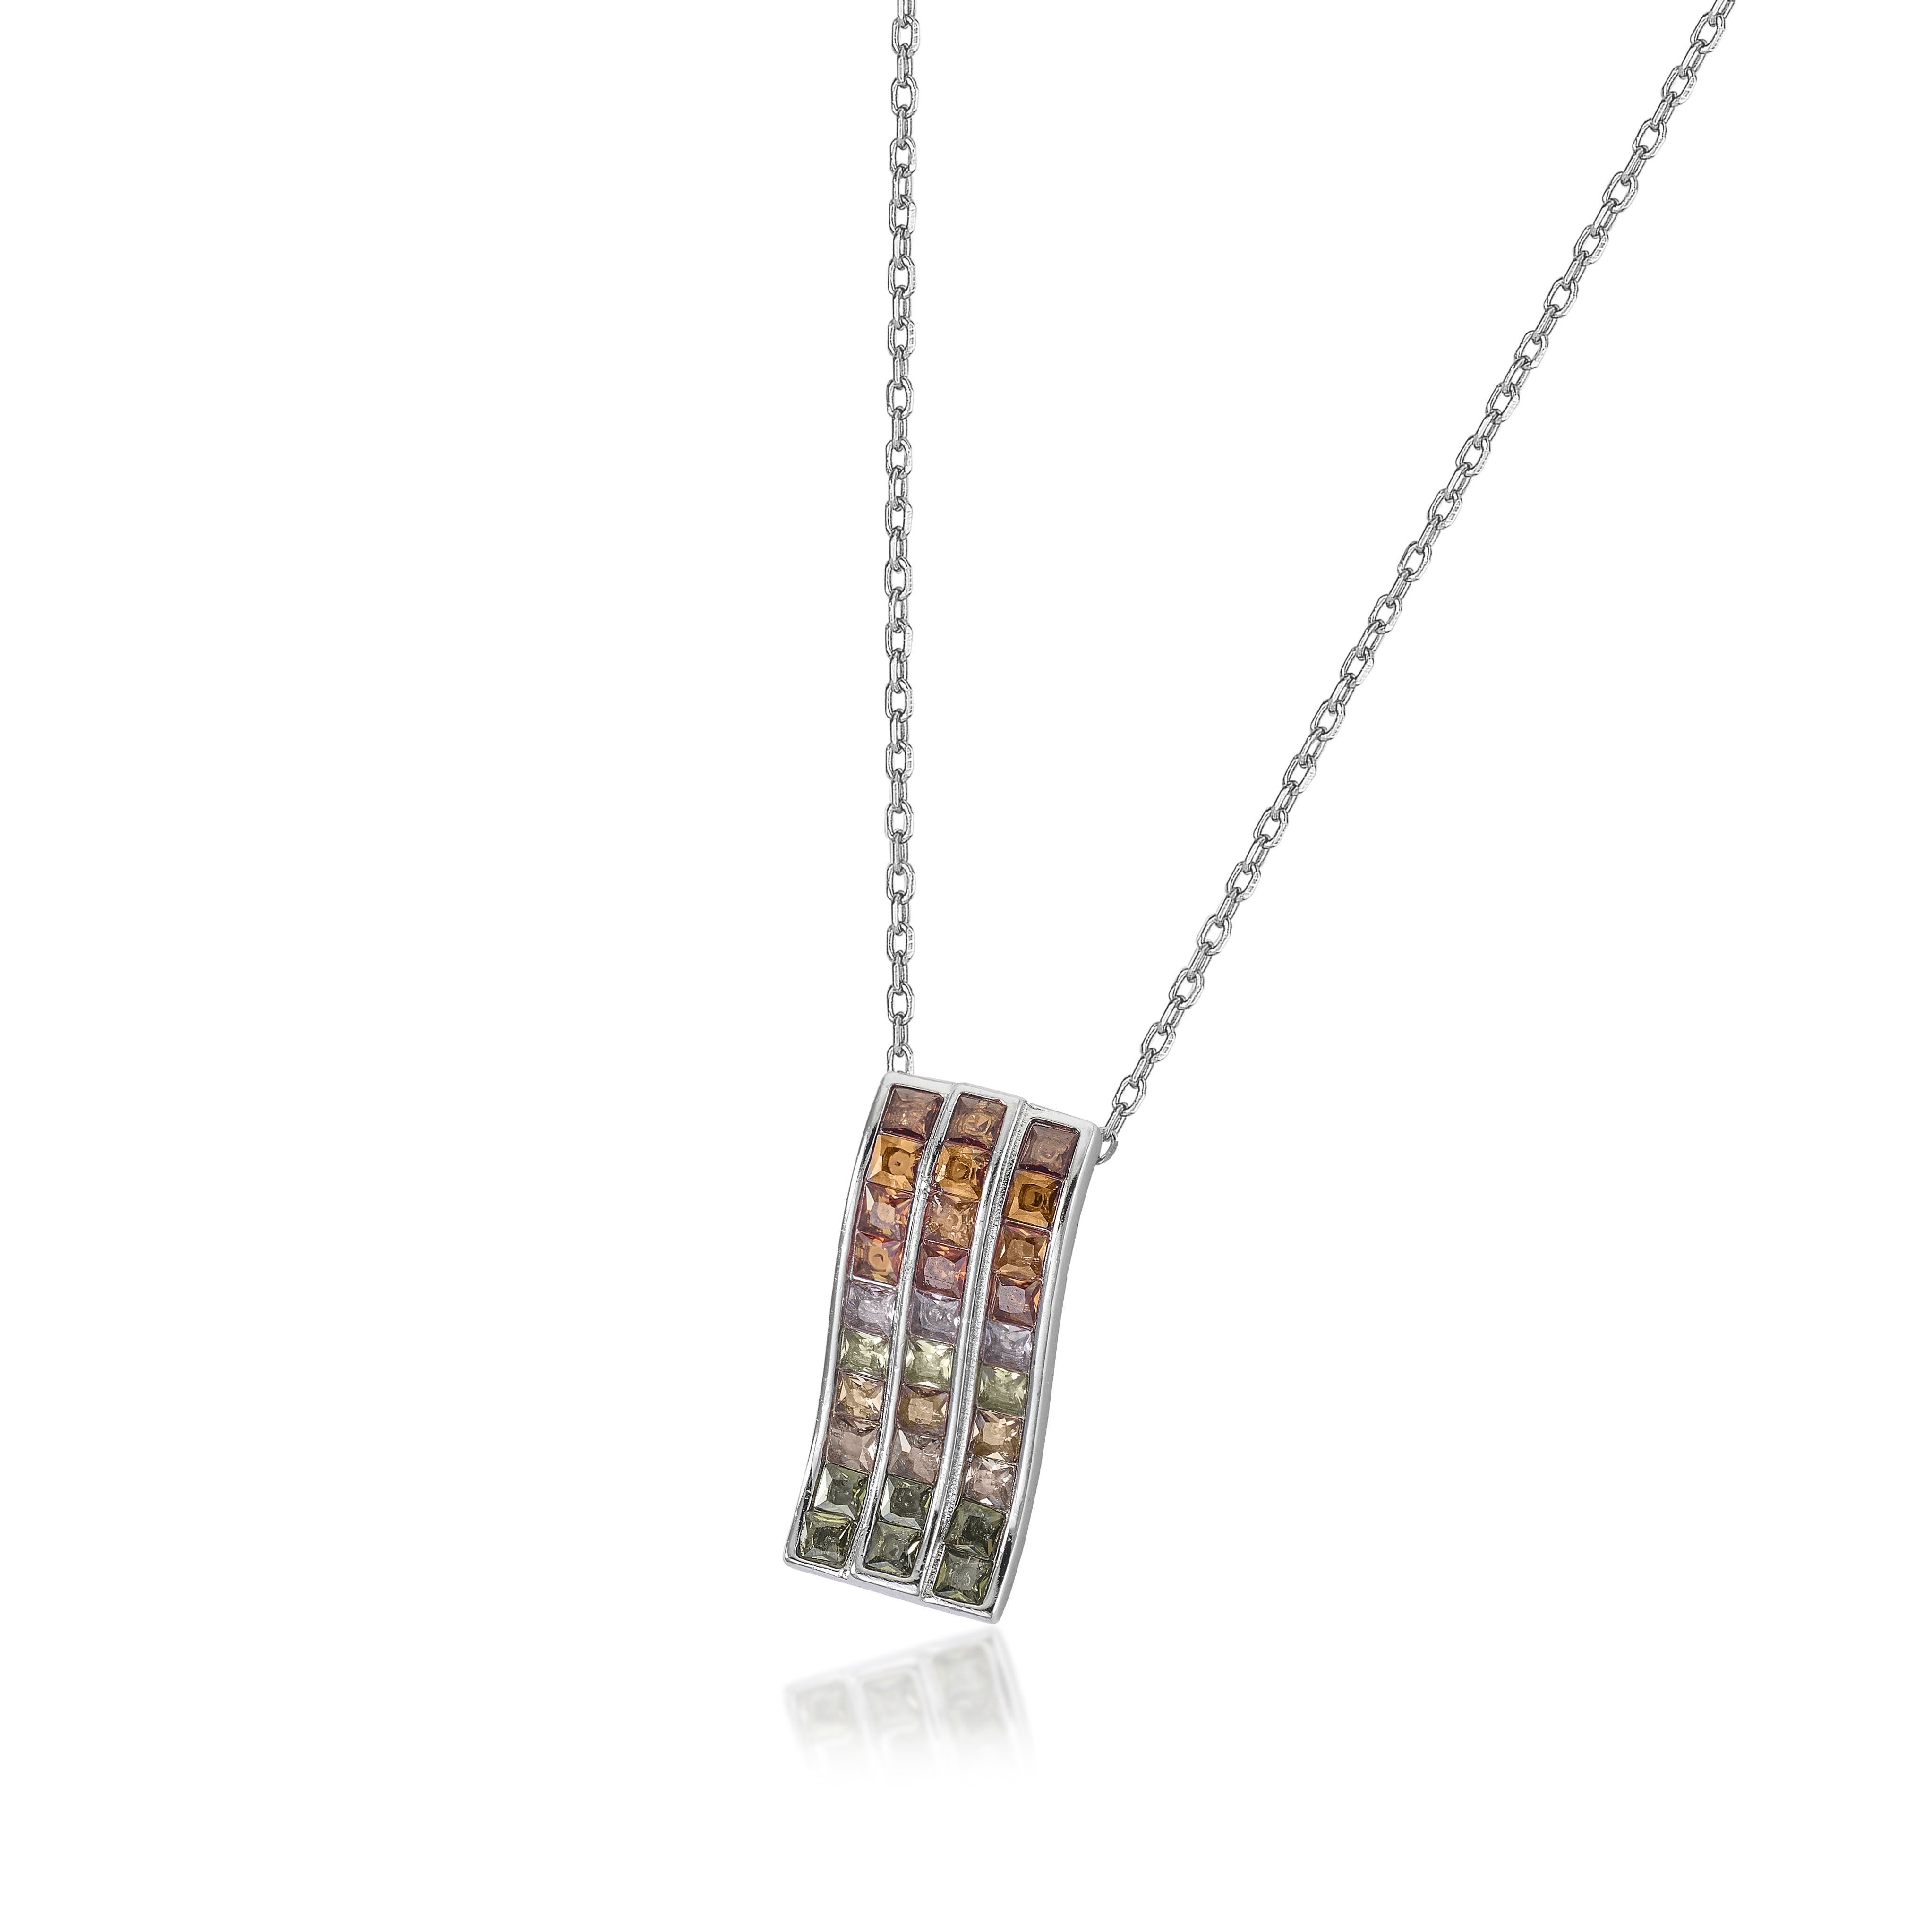 Necklaces with triple-rail stones in warm tones